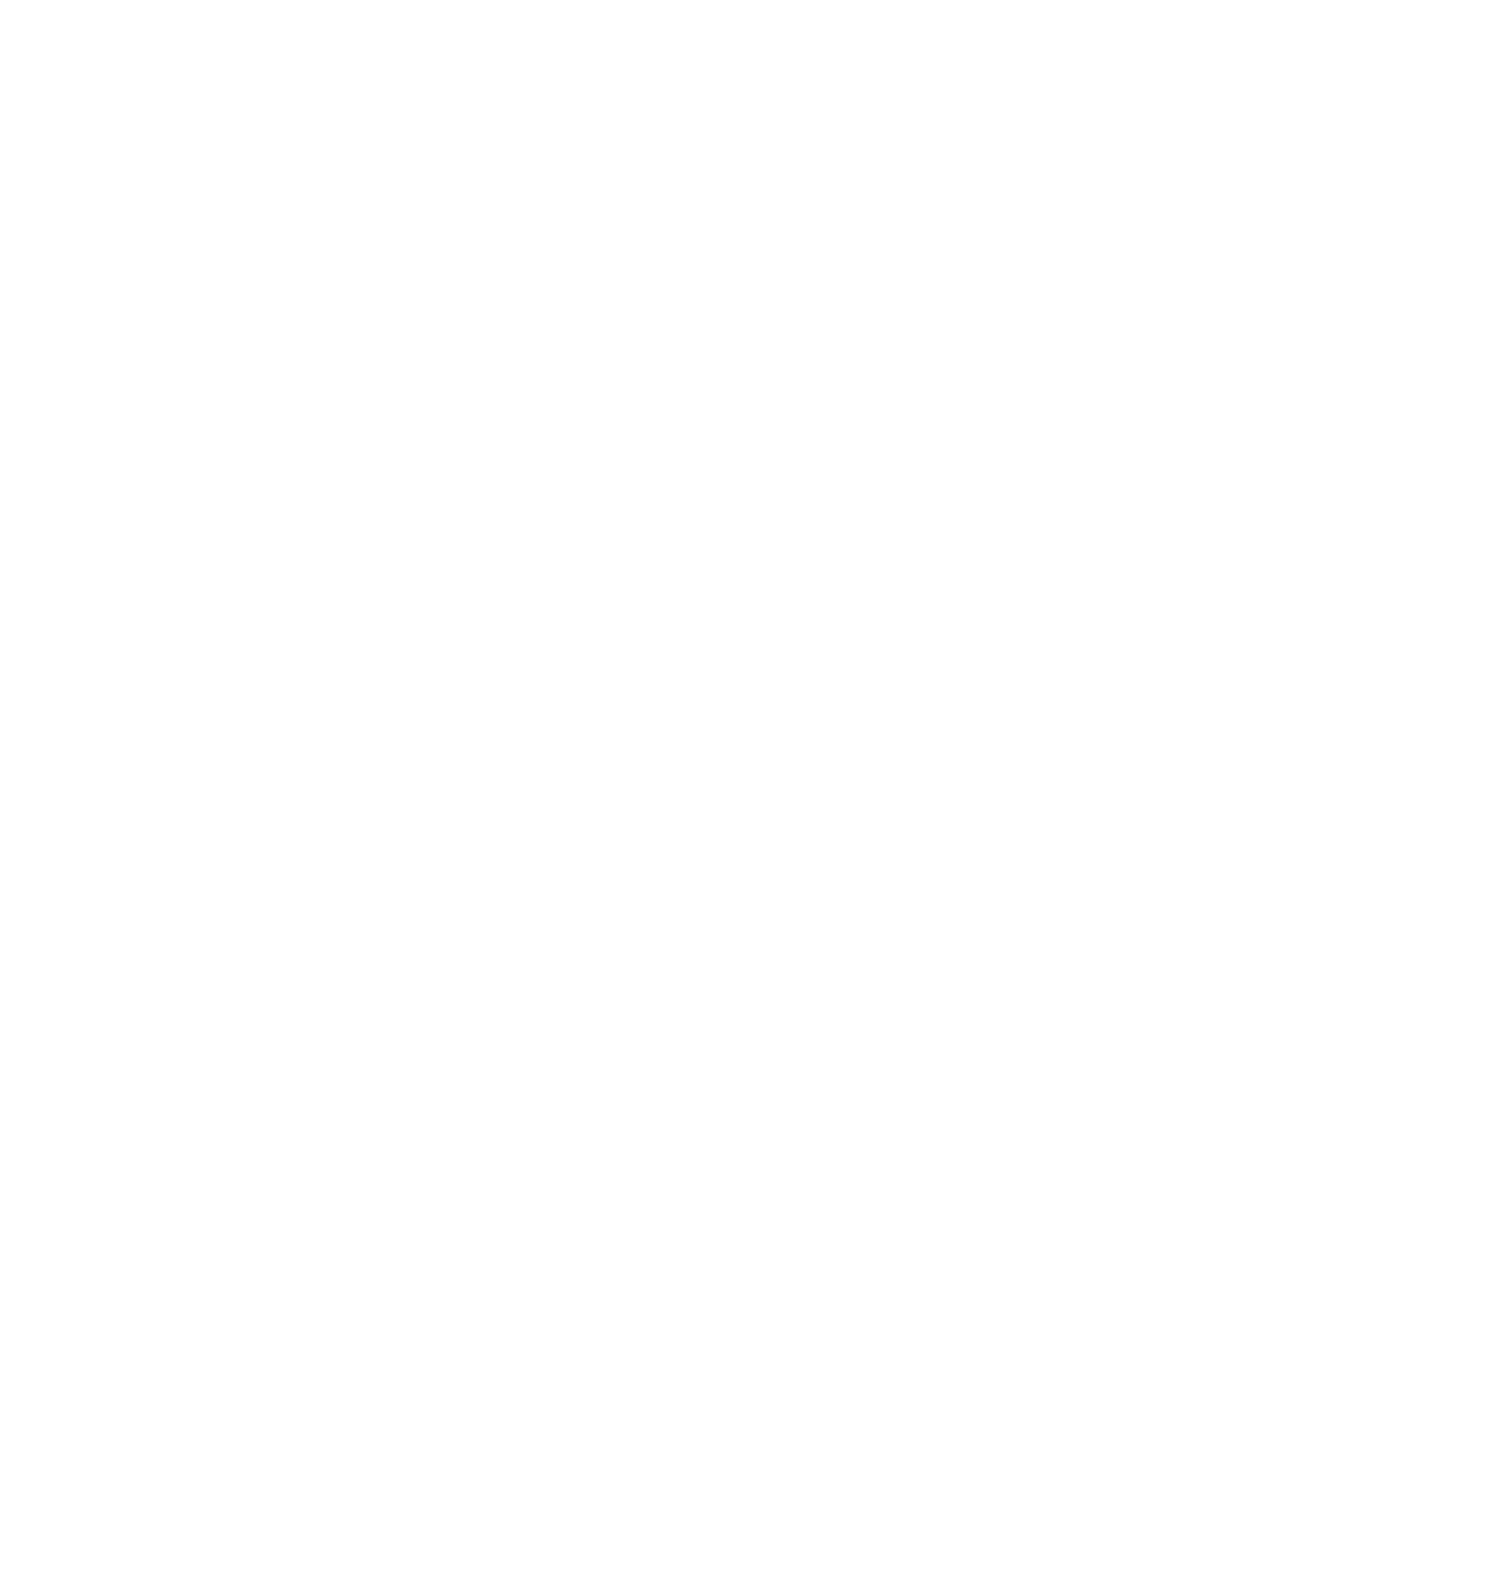 A Group Of White Spider Webs